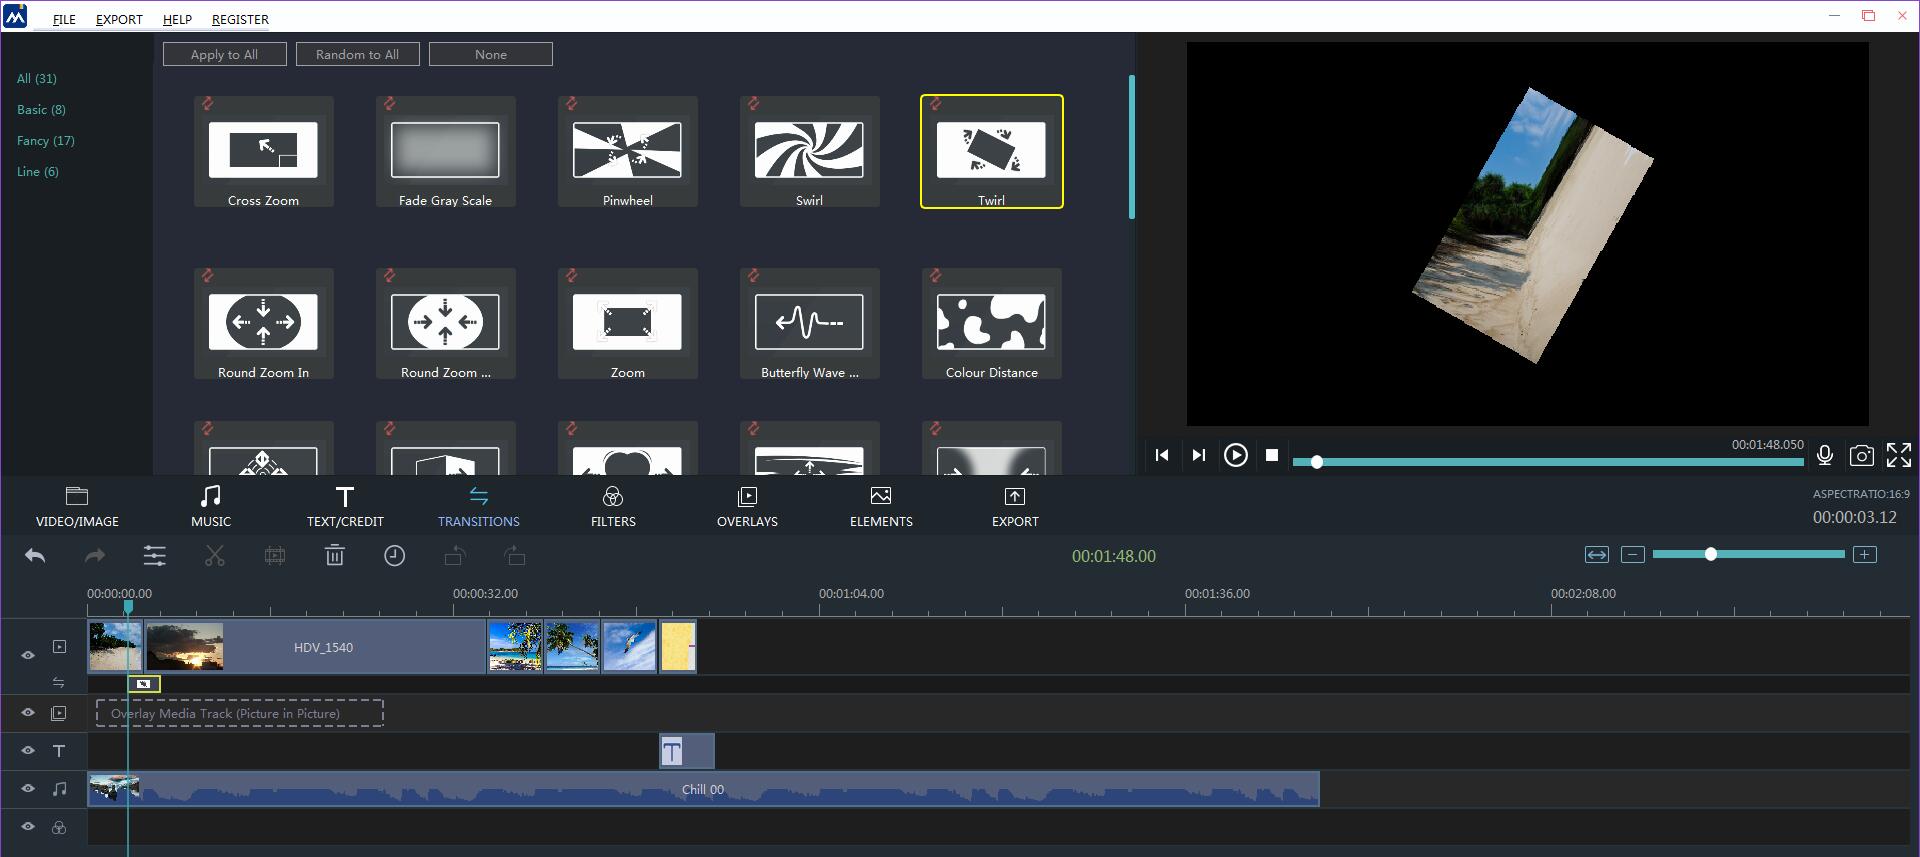 How_to_Edit_a_Video_with_Video_Win_Movie_Maker_09.jpg